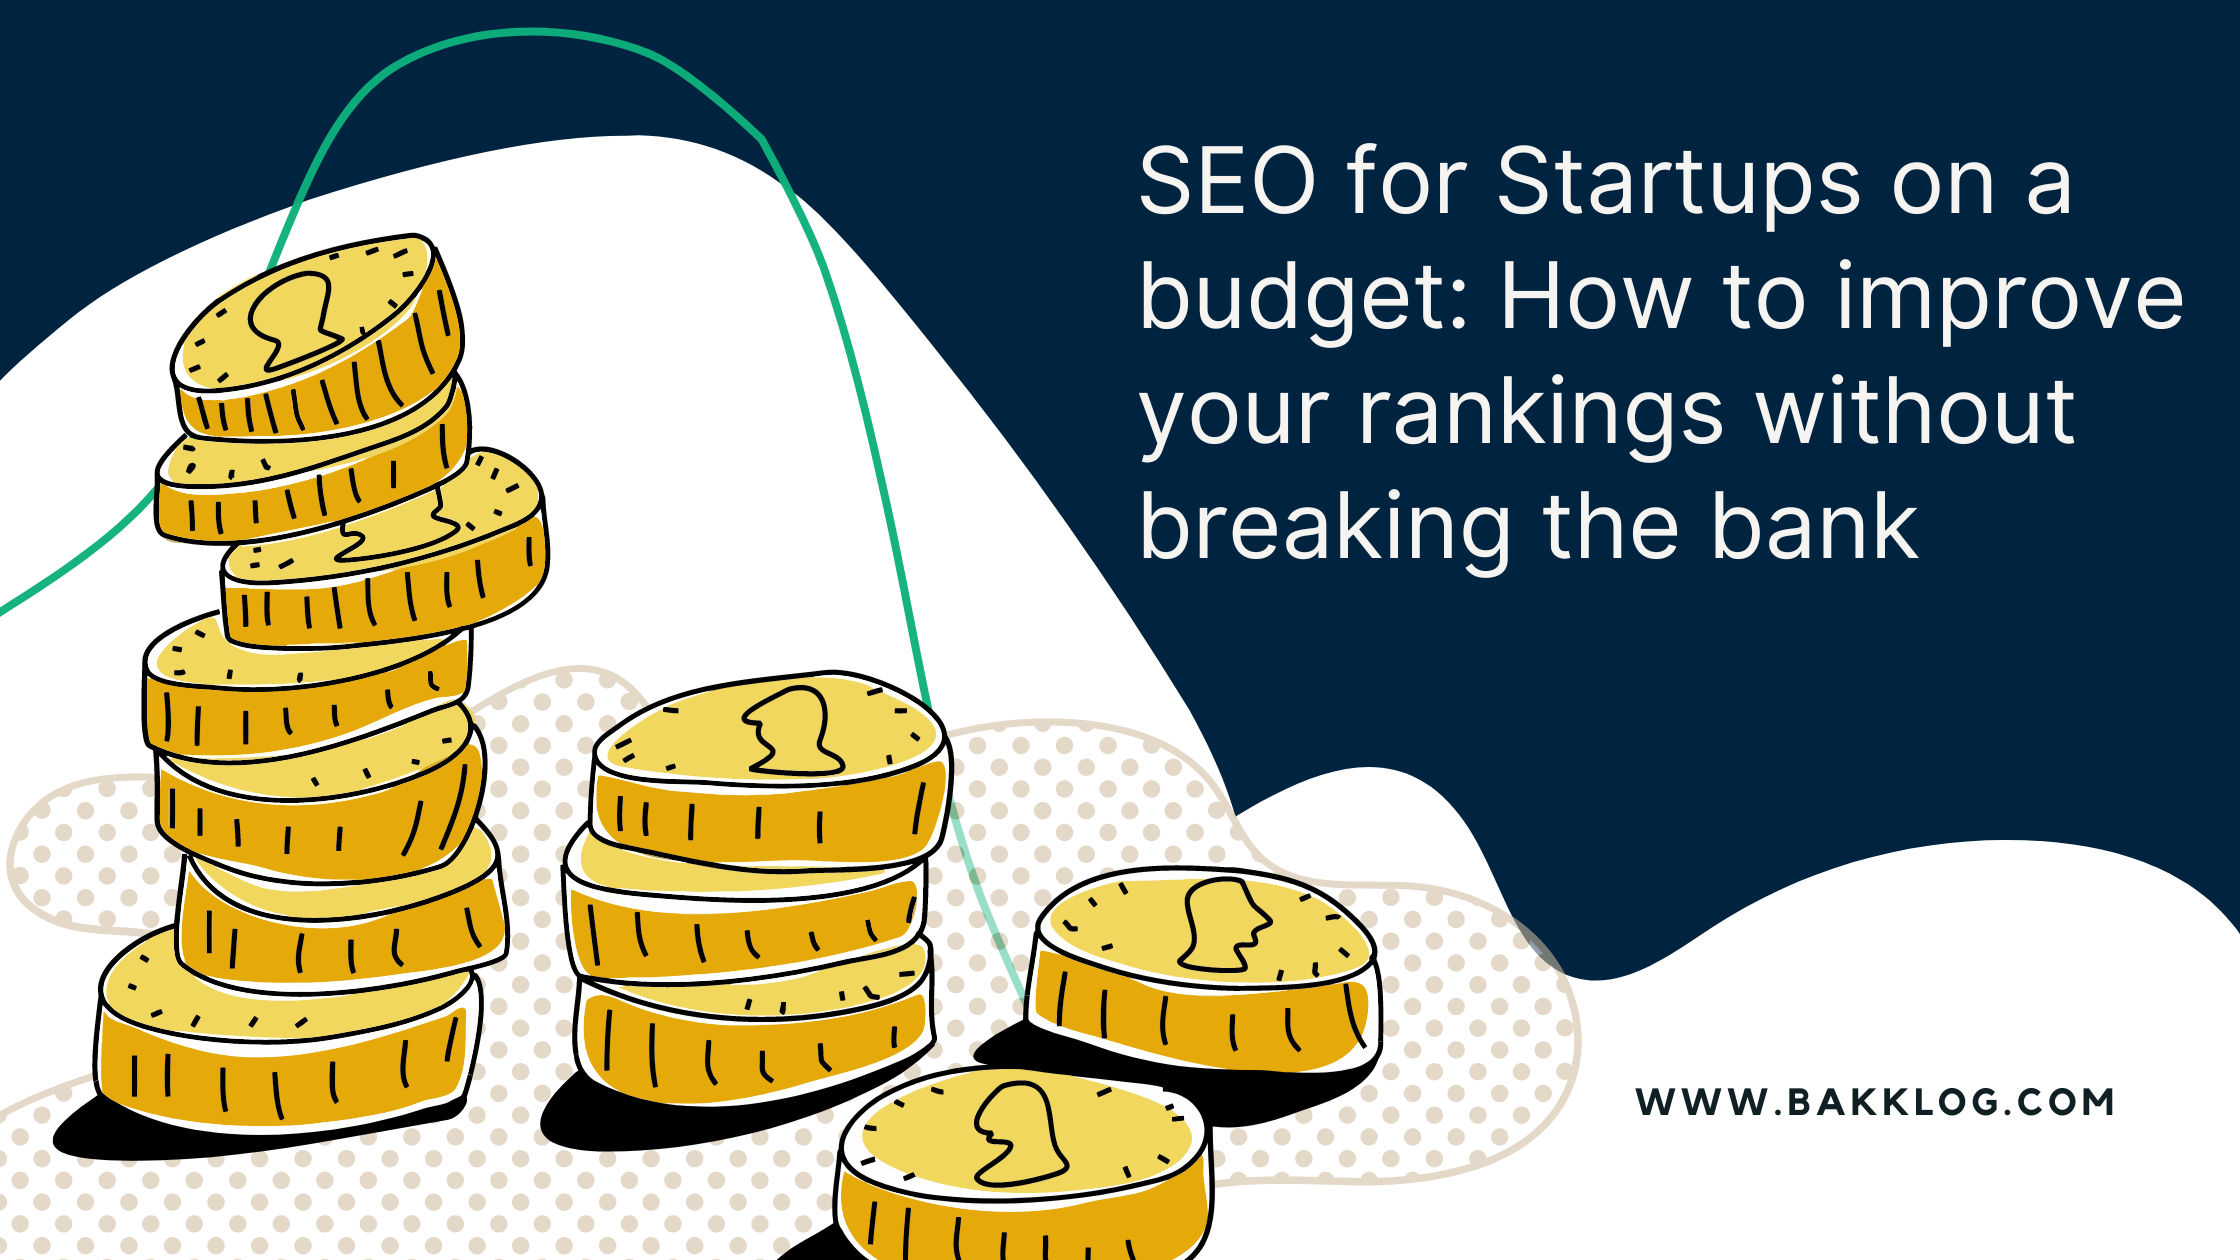 SEO for startups: ranking with a limited budget